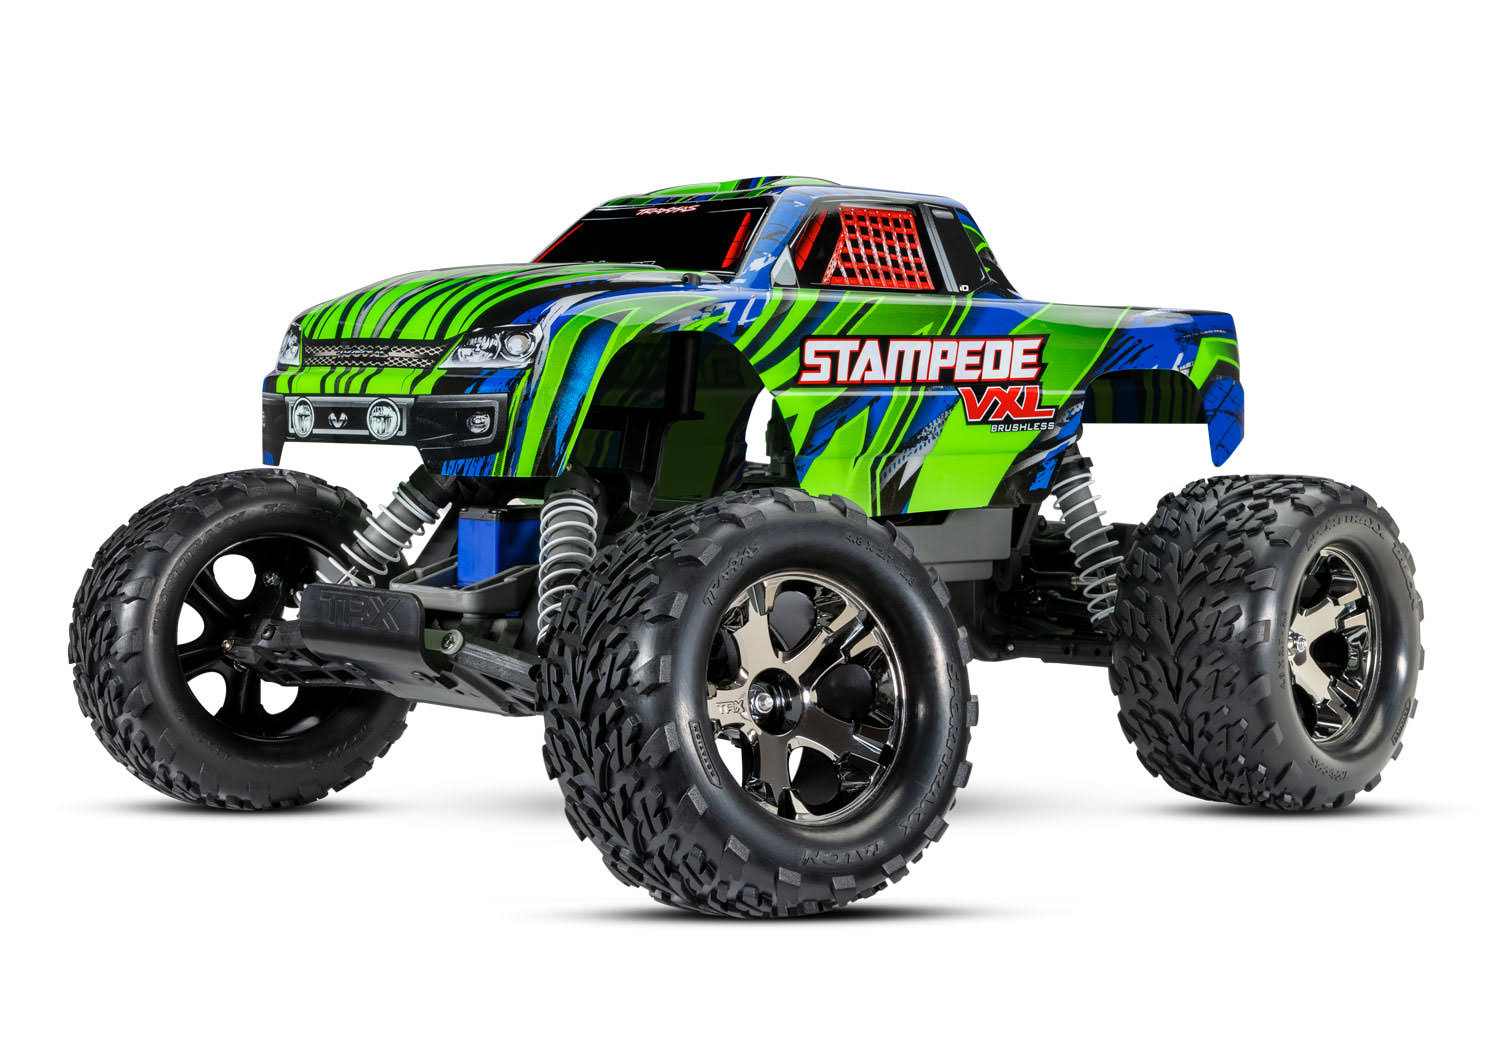 Traxxas - Stampede VXL RTR 2WD RC Truck with Magnum 272R Transmission - Green - 1/10 Scale - Battery & Charger Not Included (36076-74-GRN)